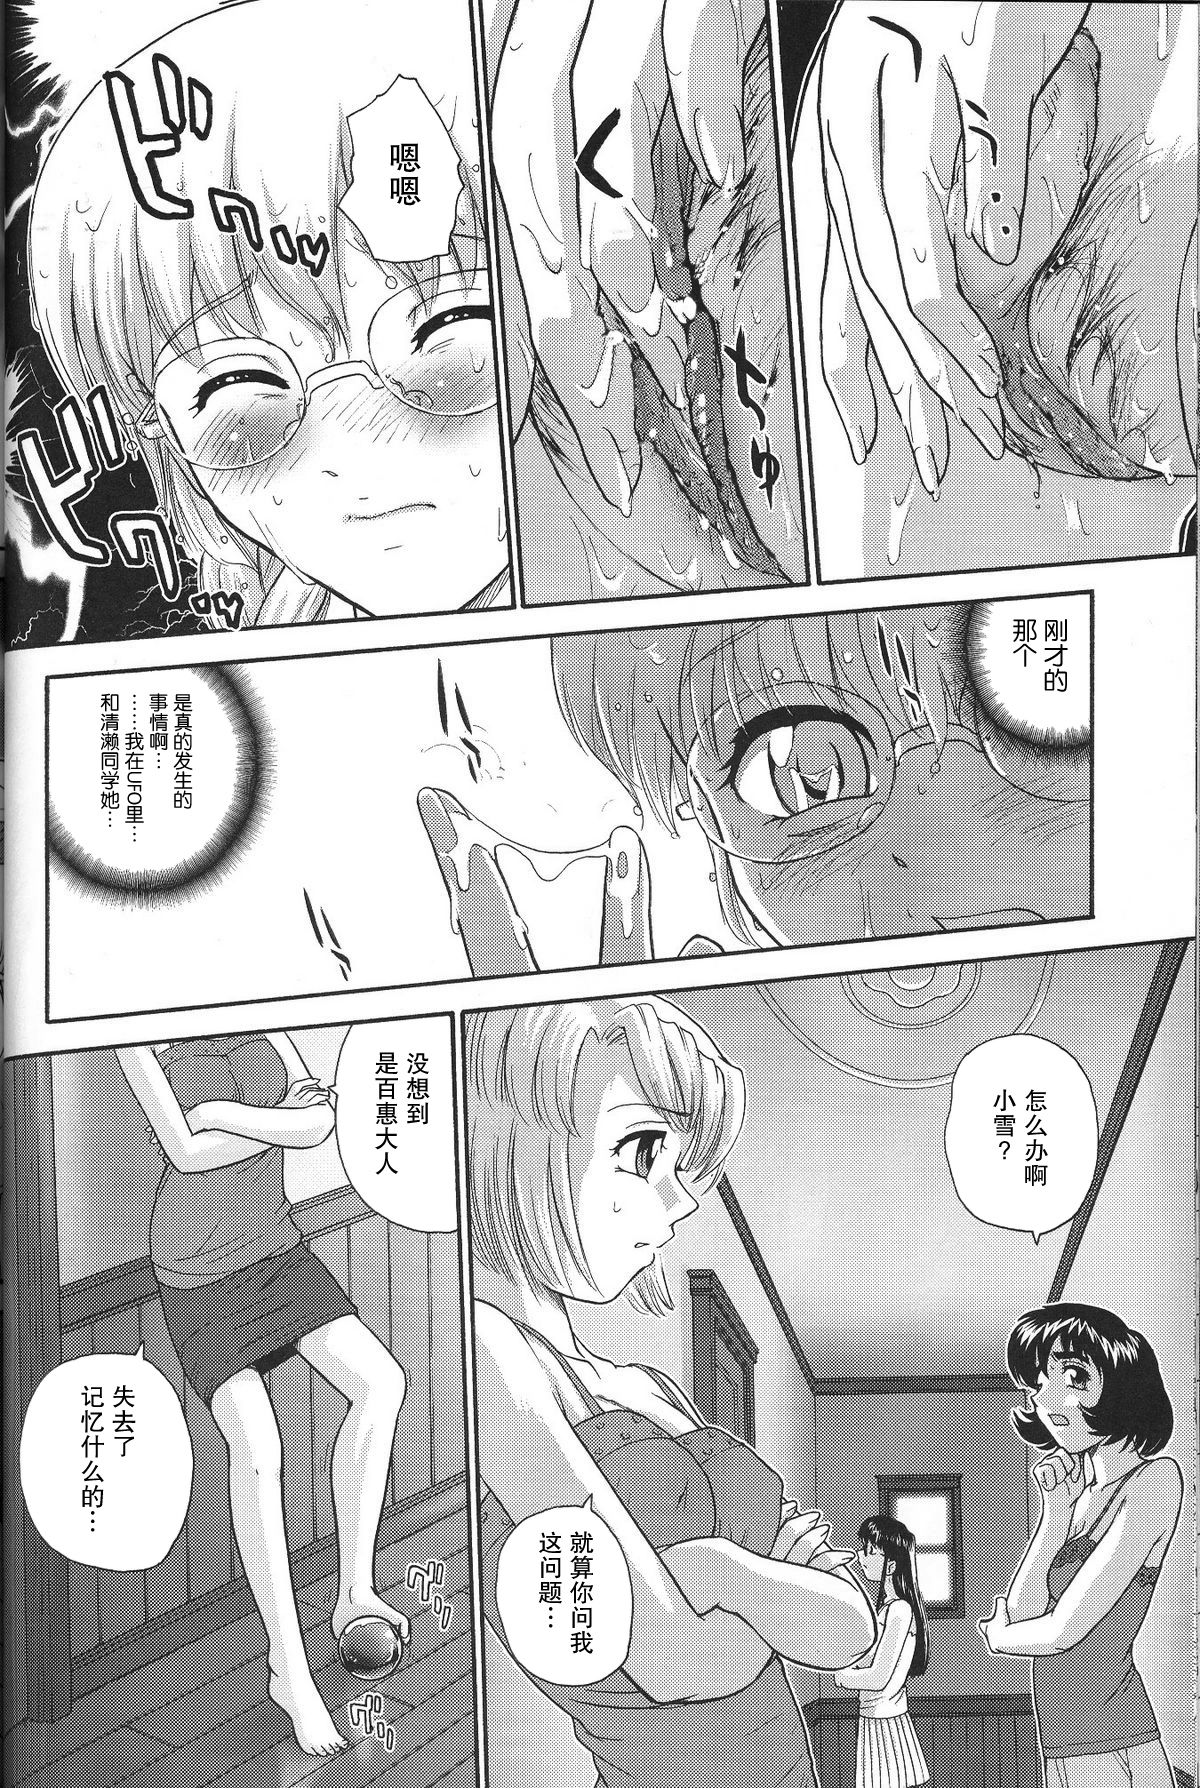 (C71) [Behind Moon (Q)] Dulce Report 8 | 达西报告 8 [Chinese] [哈尼喵汉化组] [Decensored] page 23 full